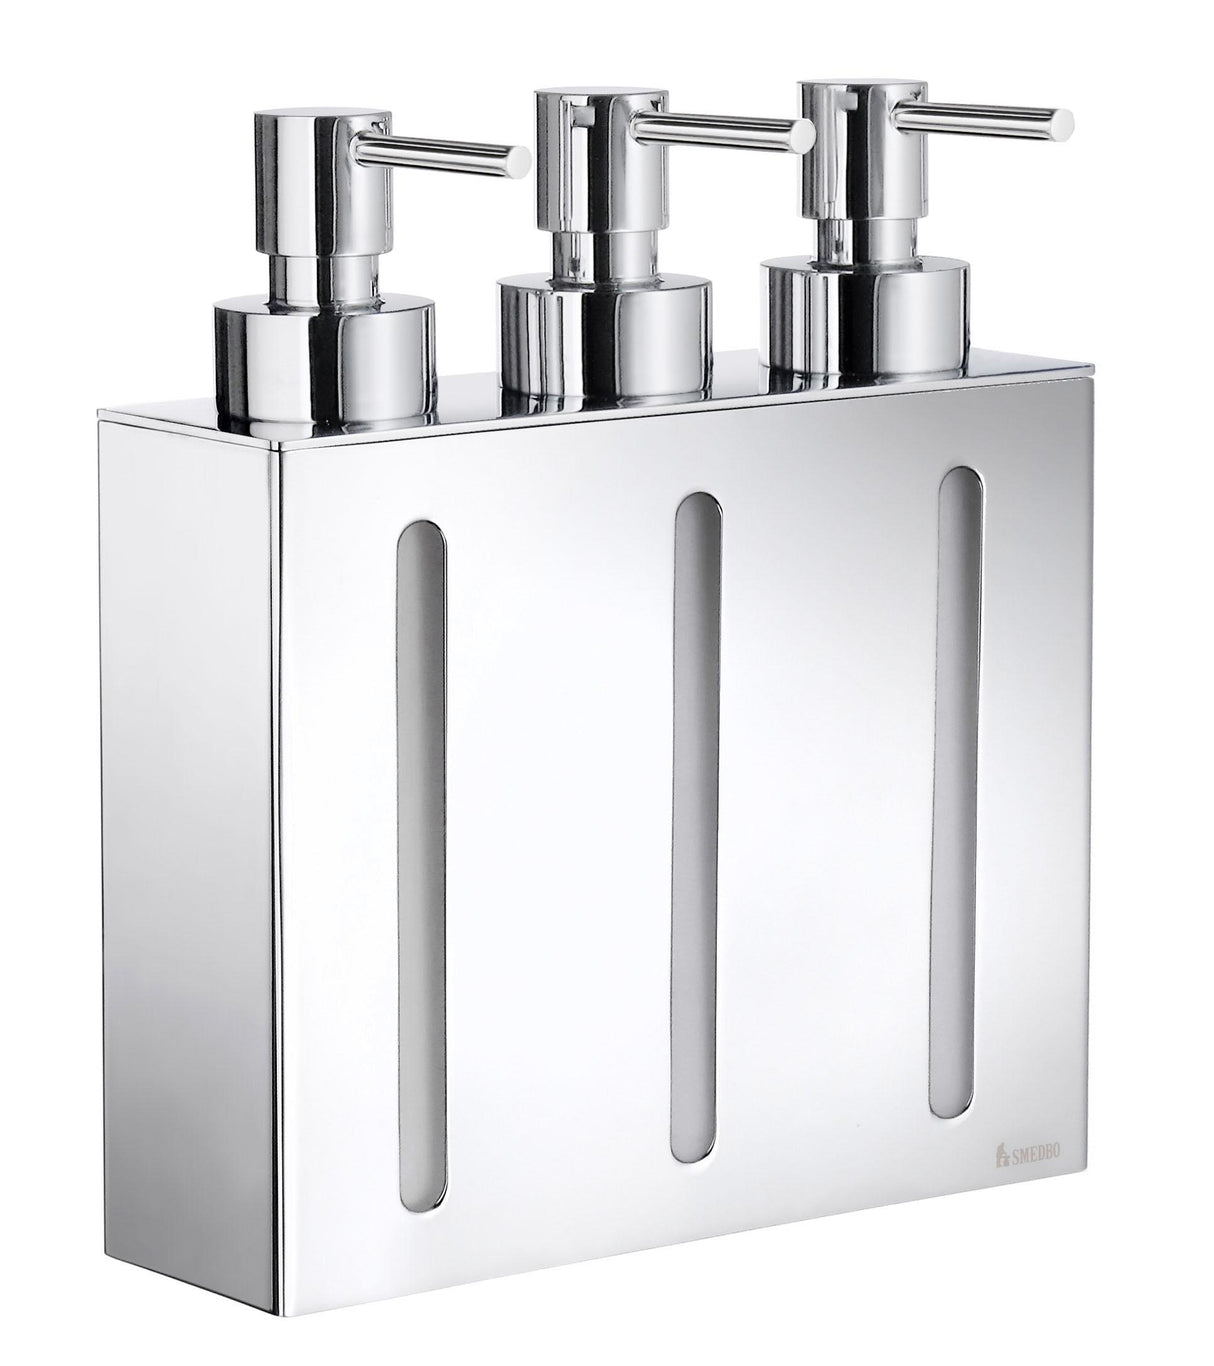 Smedbo Outline Soap Dispenser 3 container in Polished Chrome